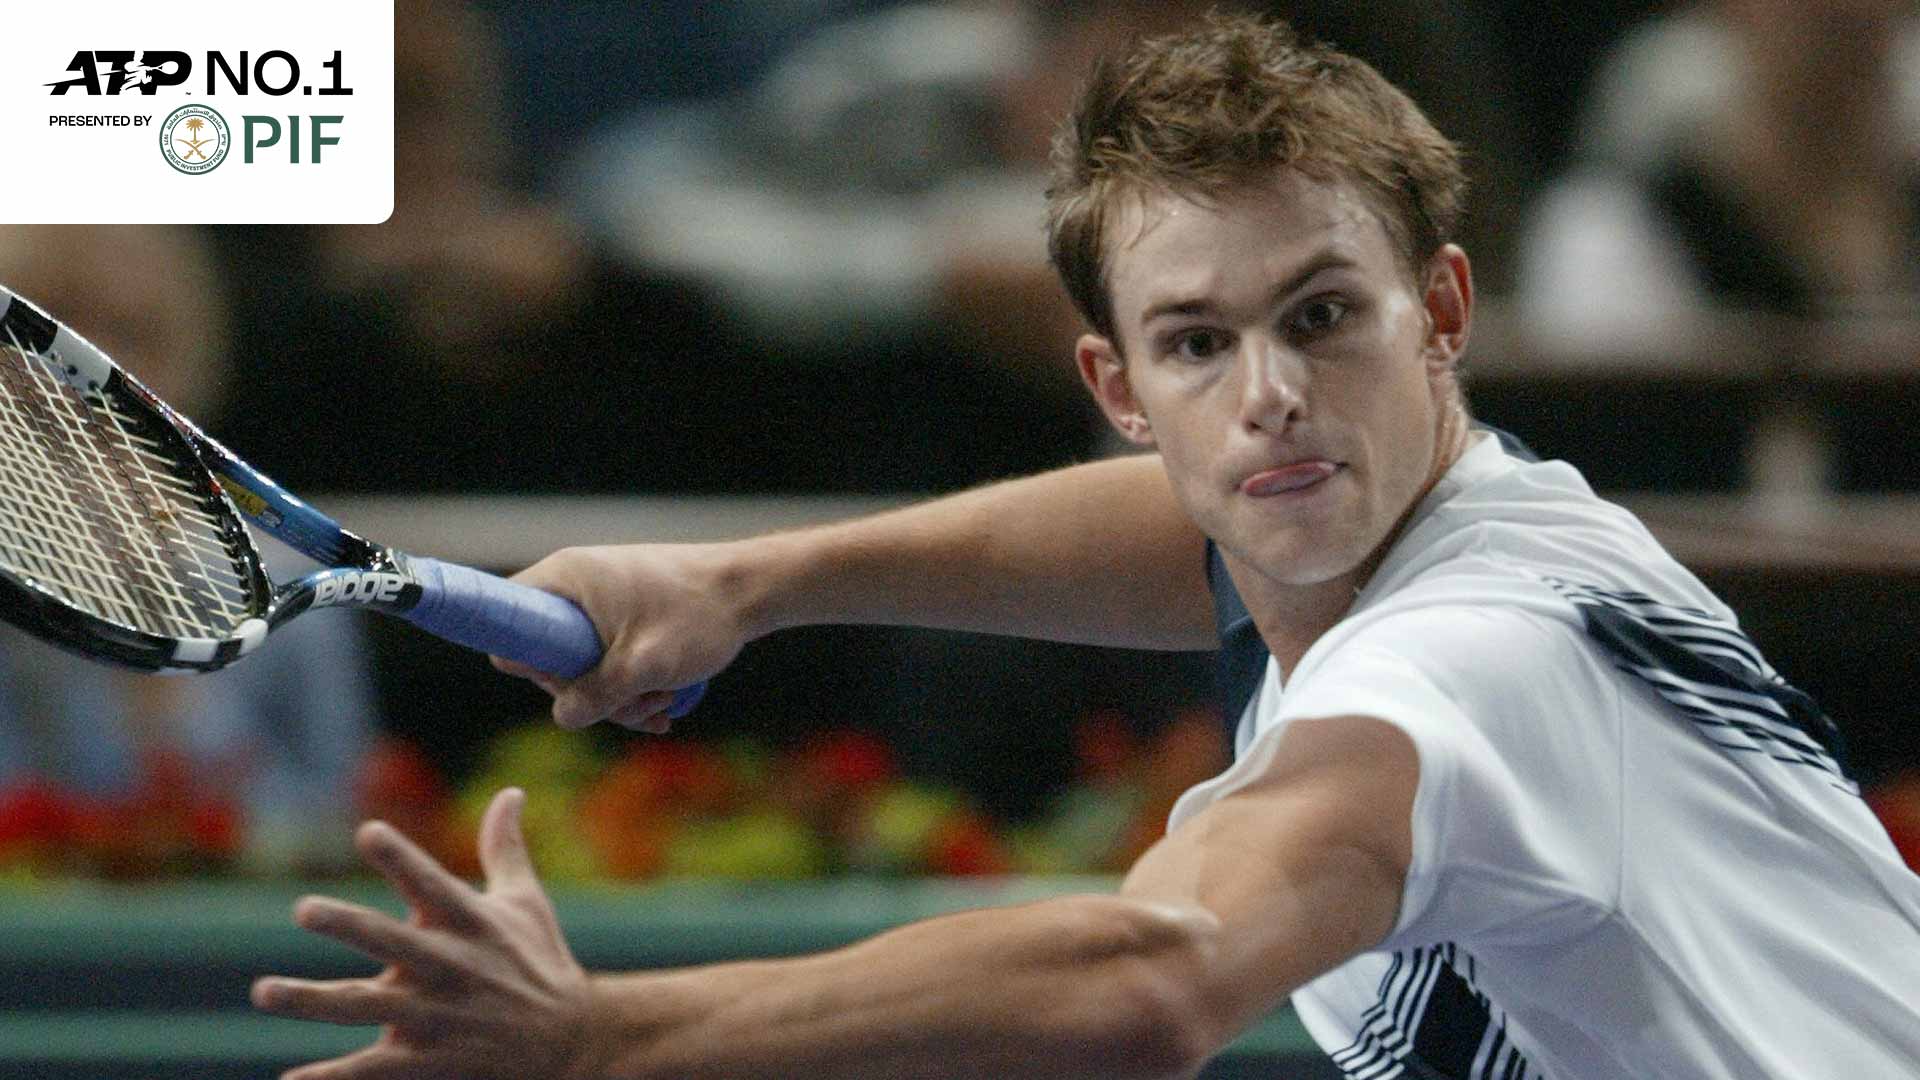 Andy Roddick rose to World No. 1 in the PIF ATP Rankings for the first time after a semi-final run at the 2003 Paris Masters.